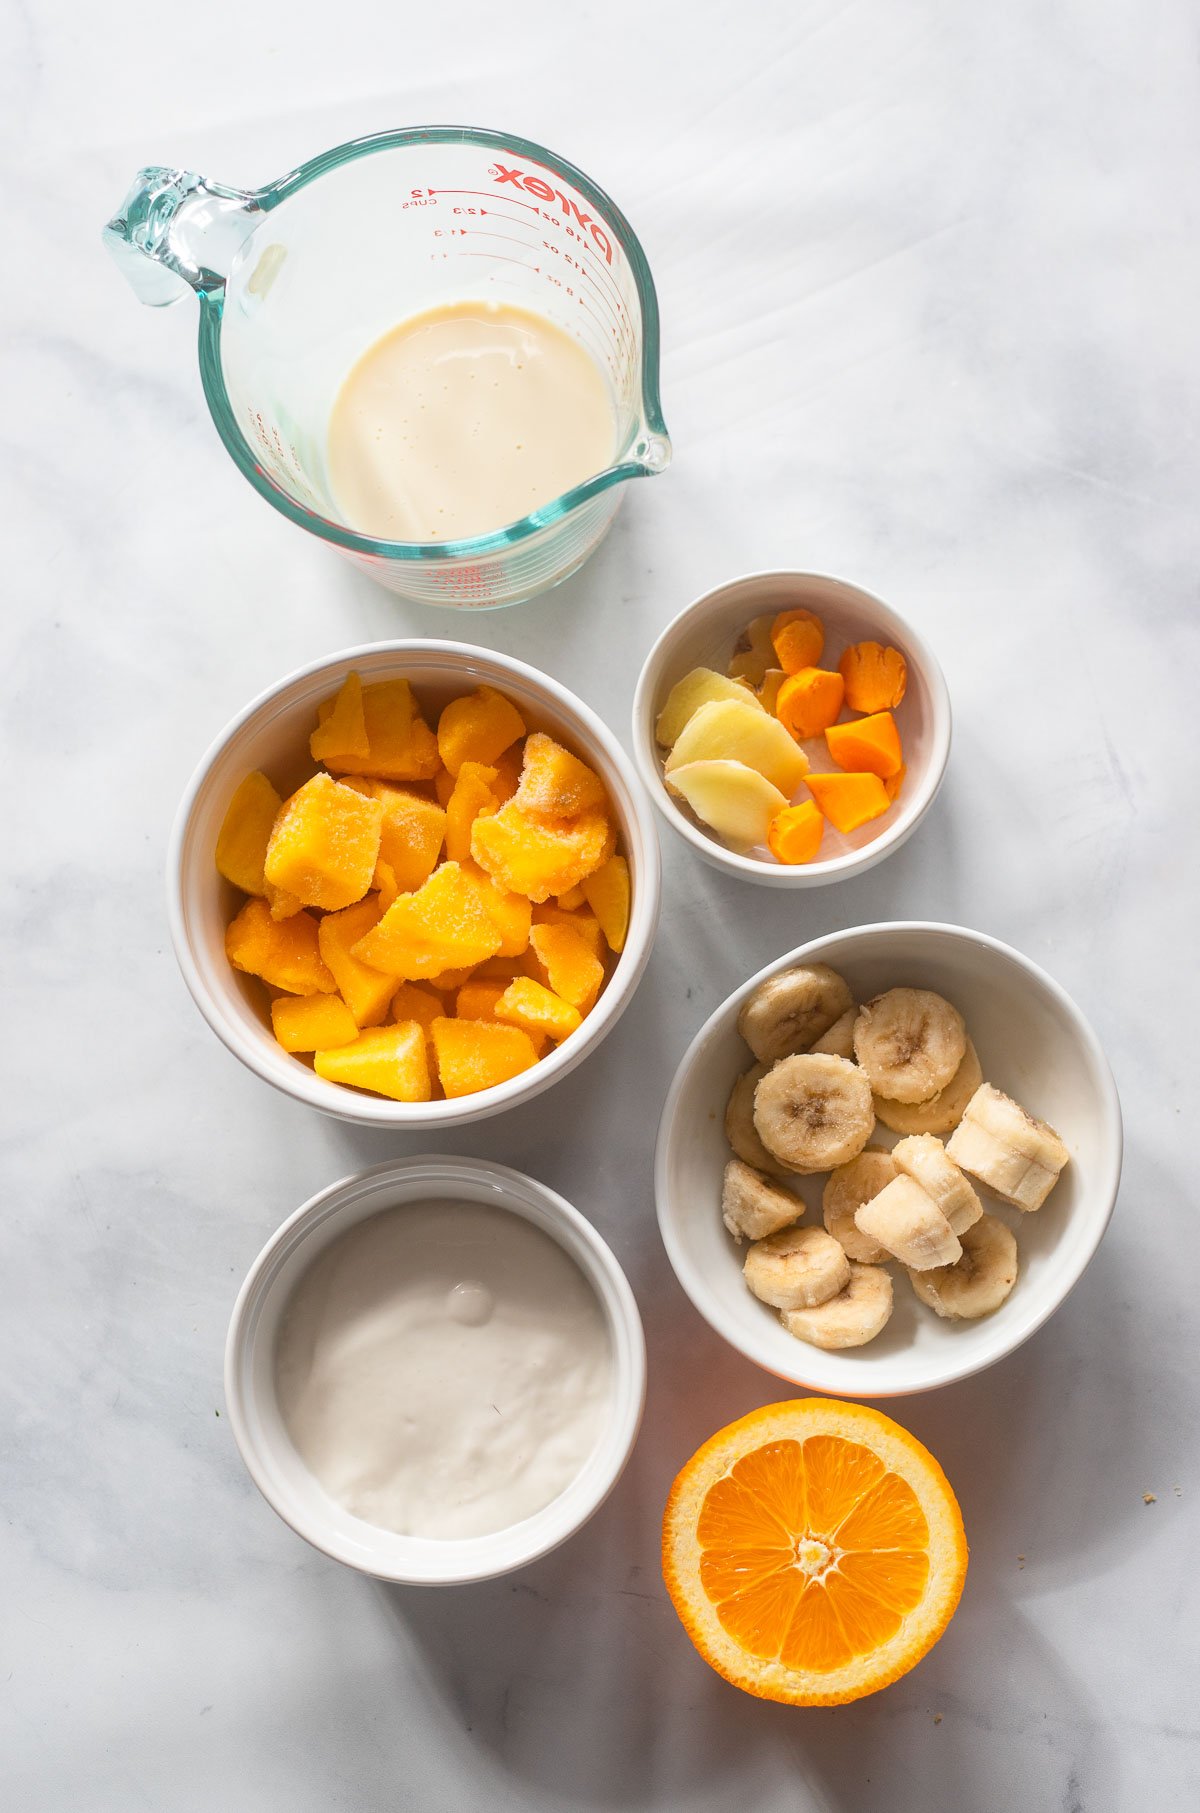 Mango and turmeric smoothie ingredients in small bowls placed on a marble background.